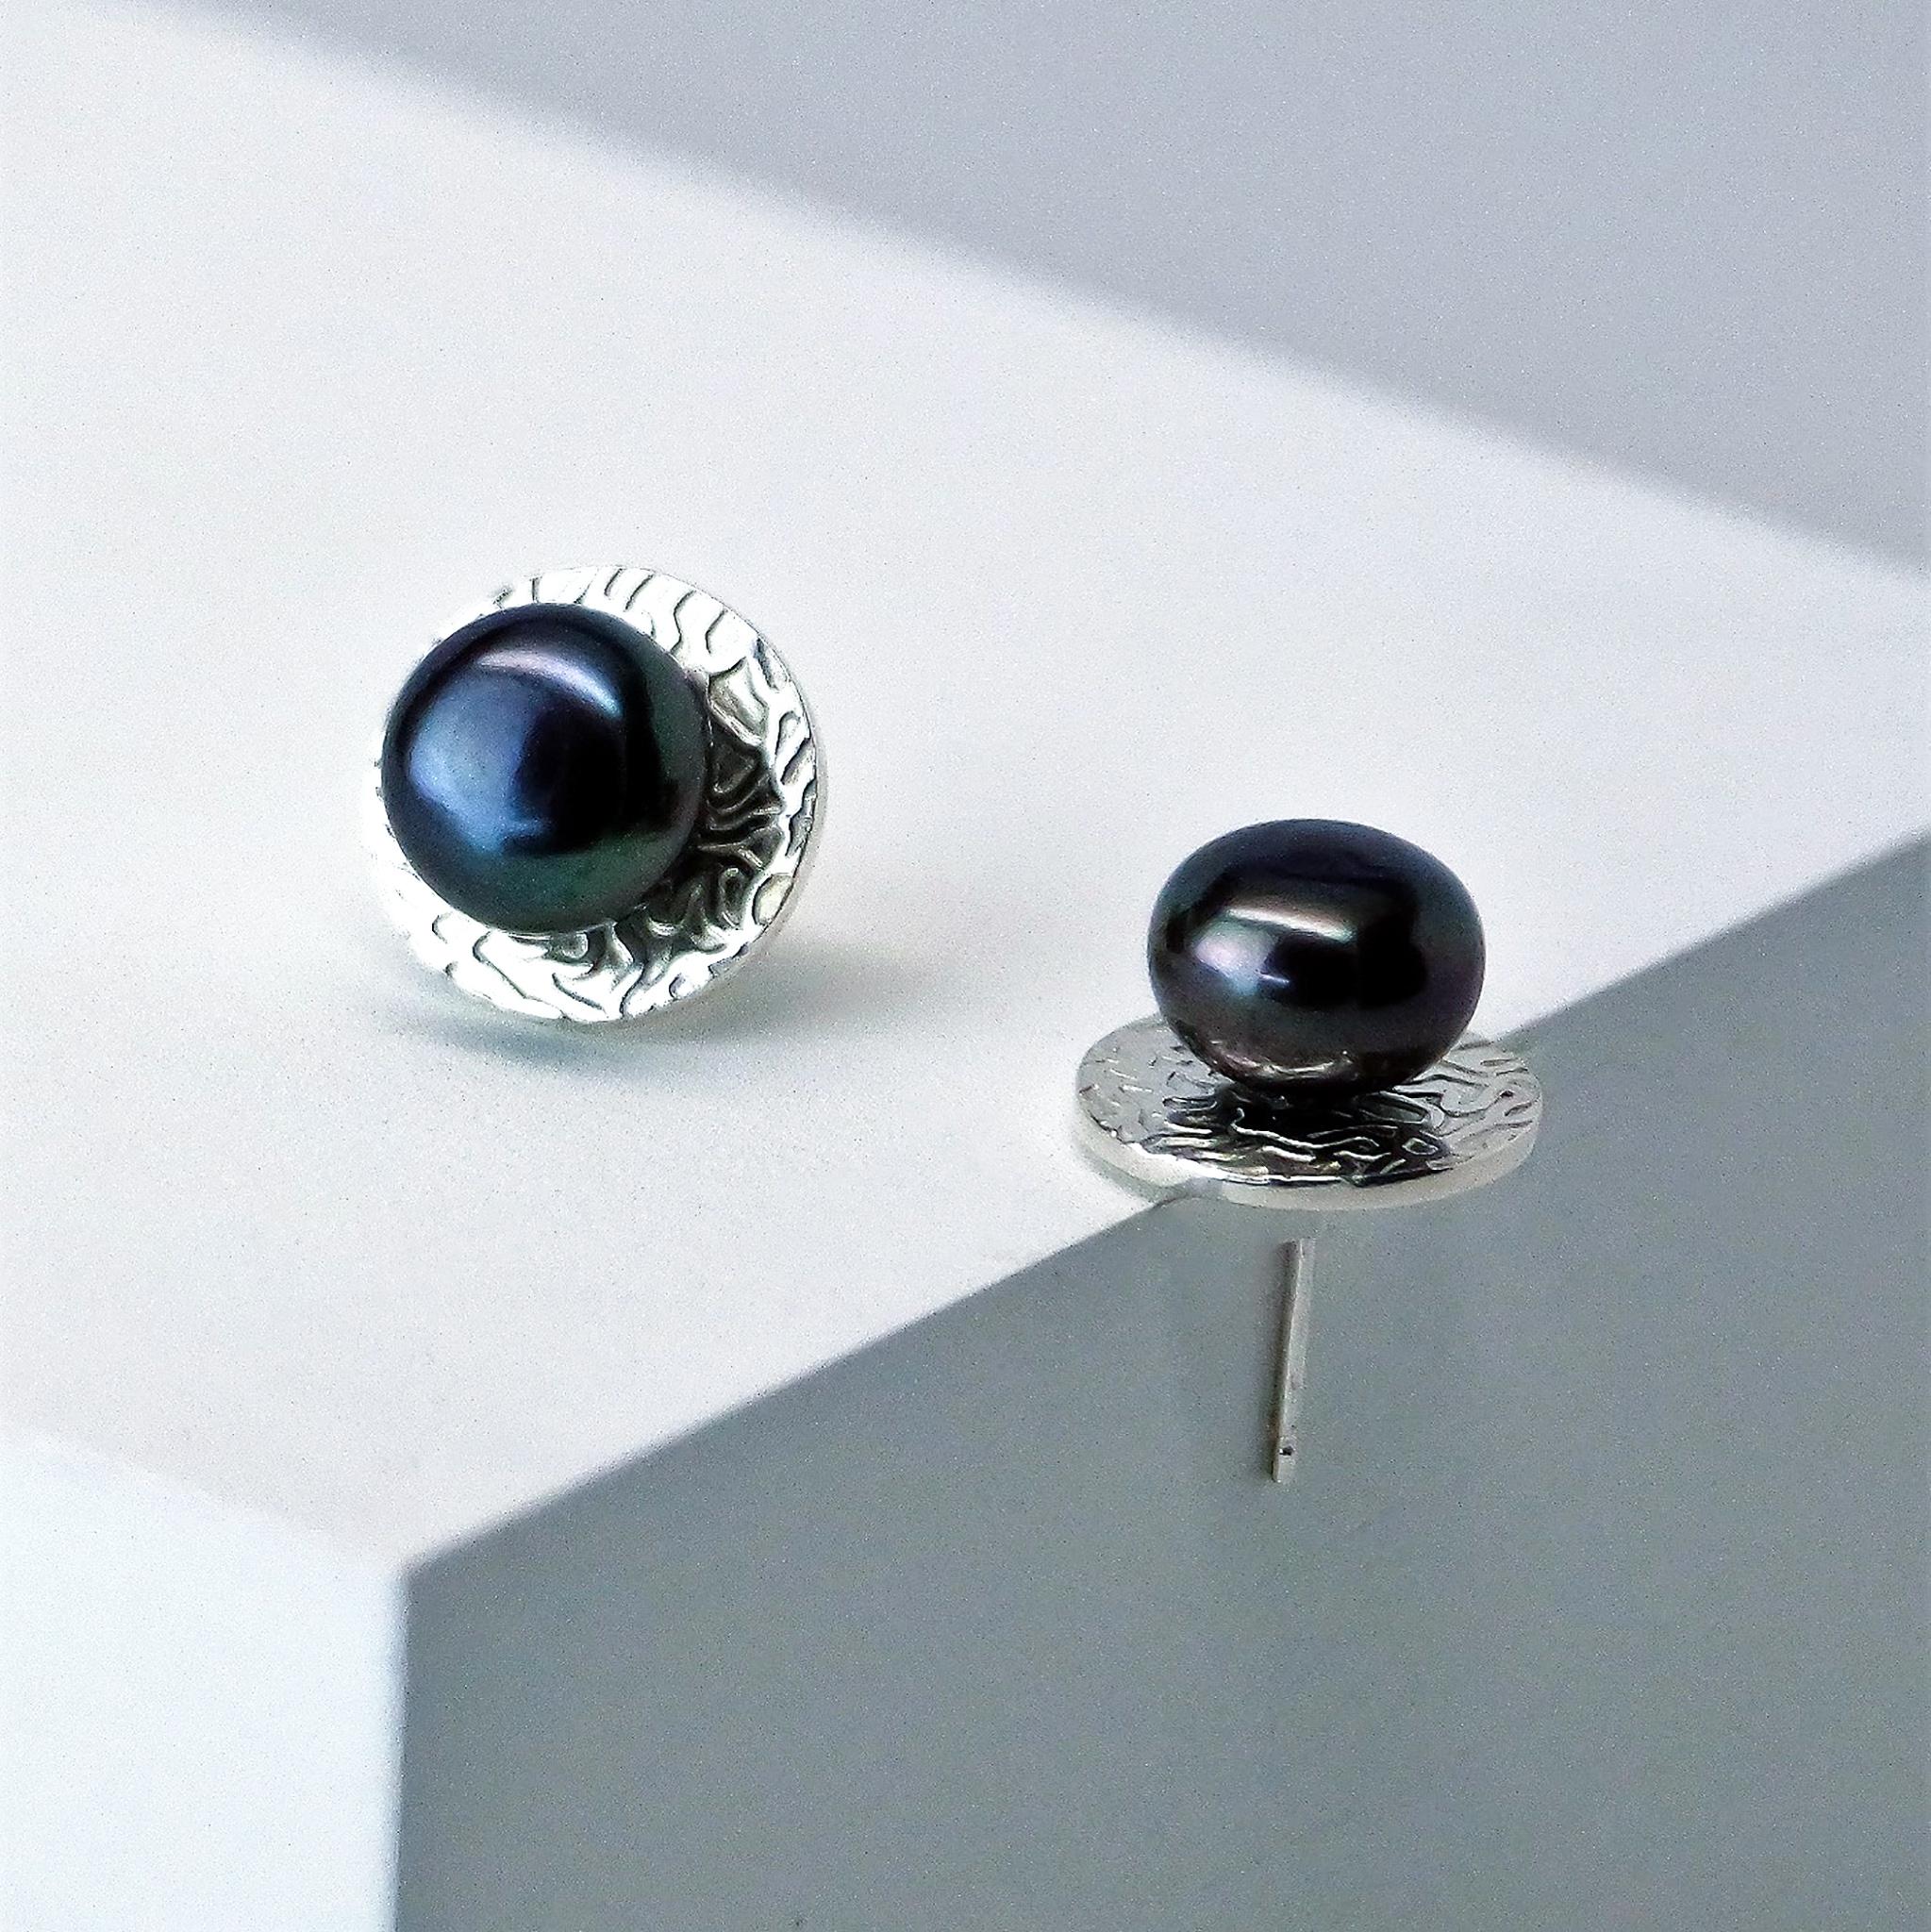 Traditional and yet has a subtle edge, the inspiration behind the Eclipse Studs is about the observer and their source of illumination. Sustainably made in recycled sterling silver and freshwater button pearls, these studs are perfect for everyday